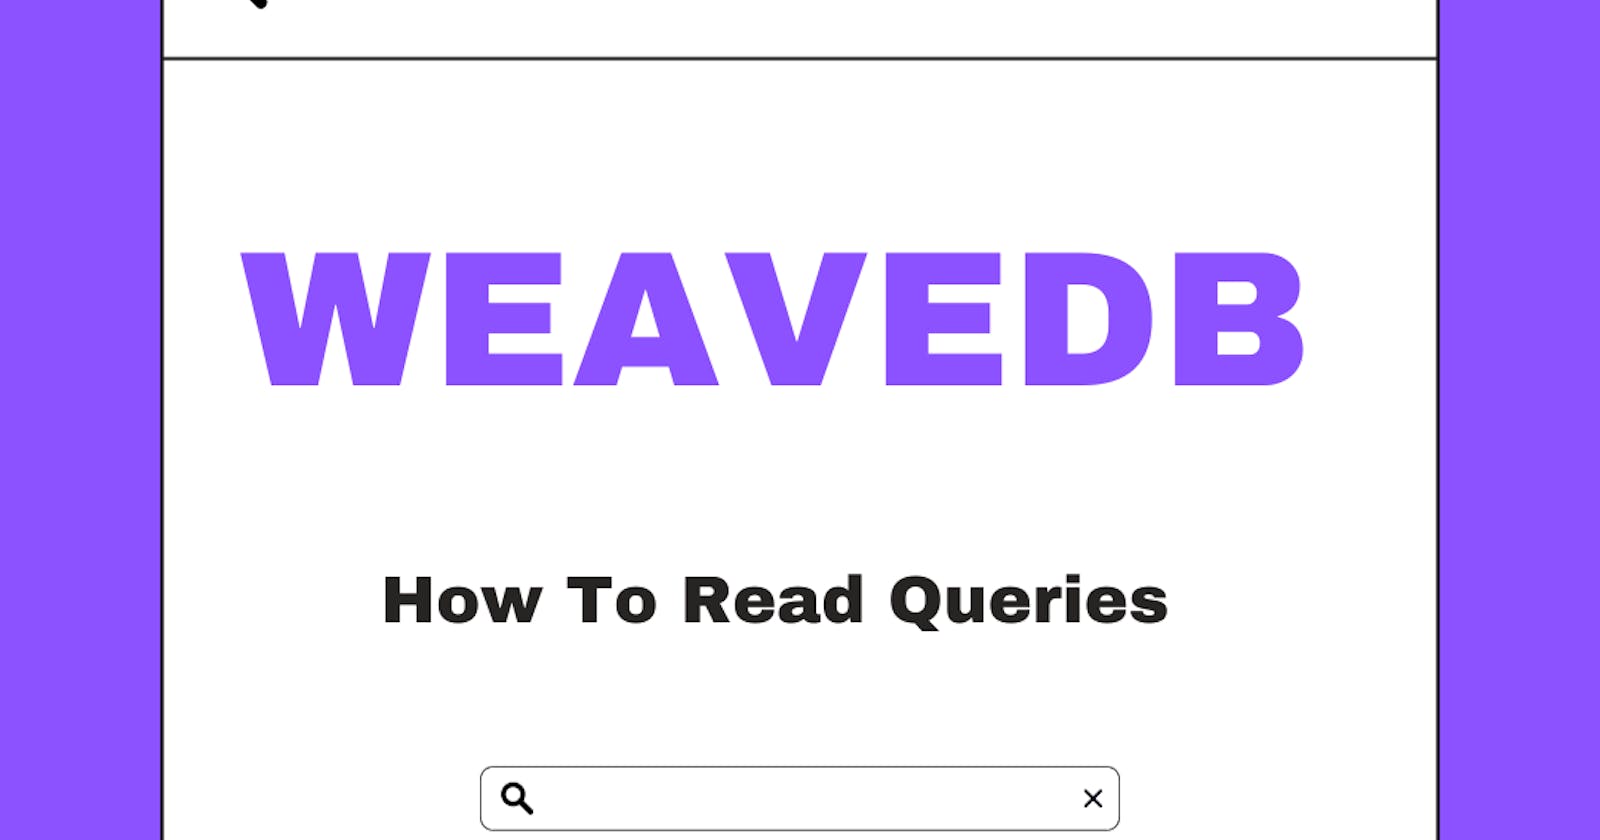 How to Read Queries with WeaveDB